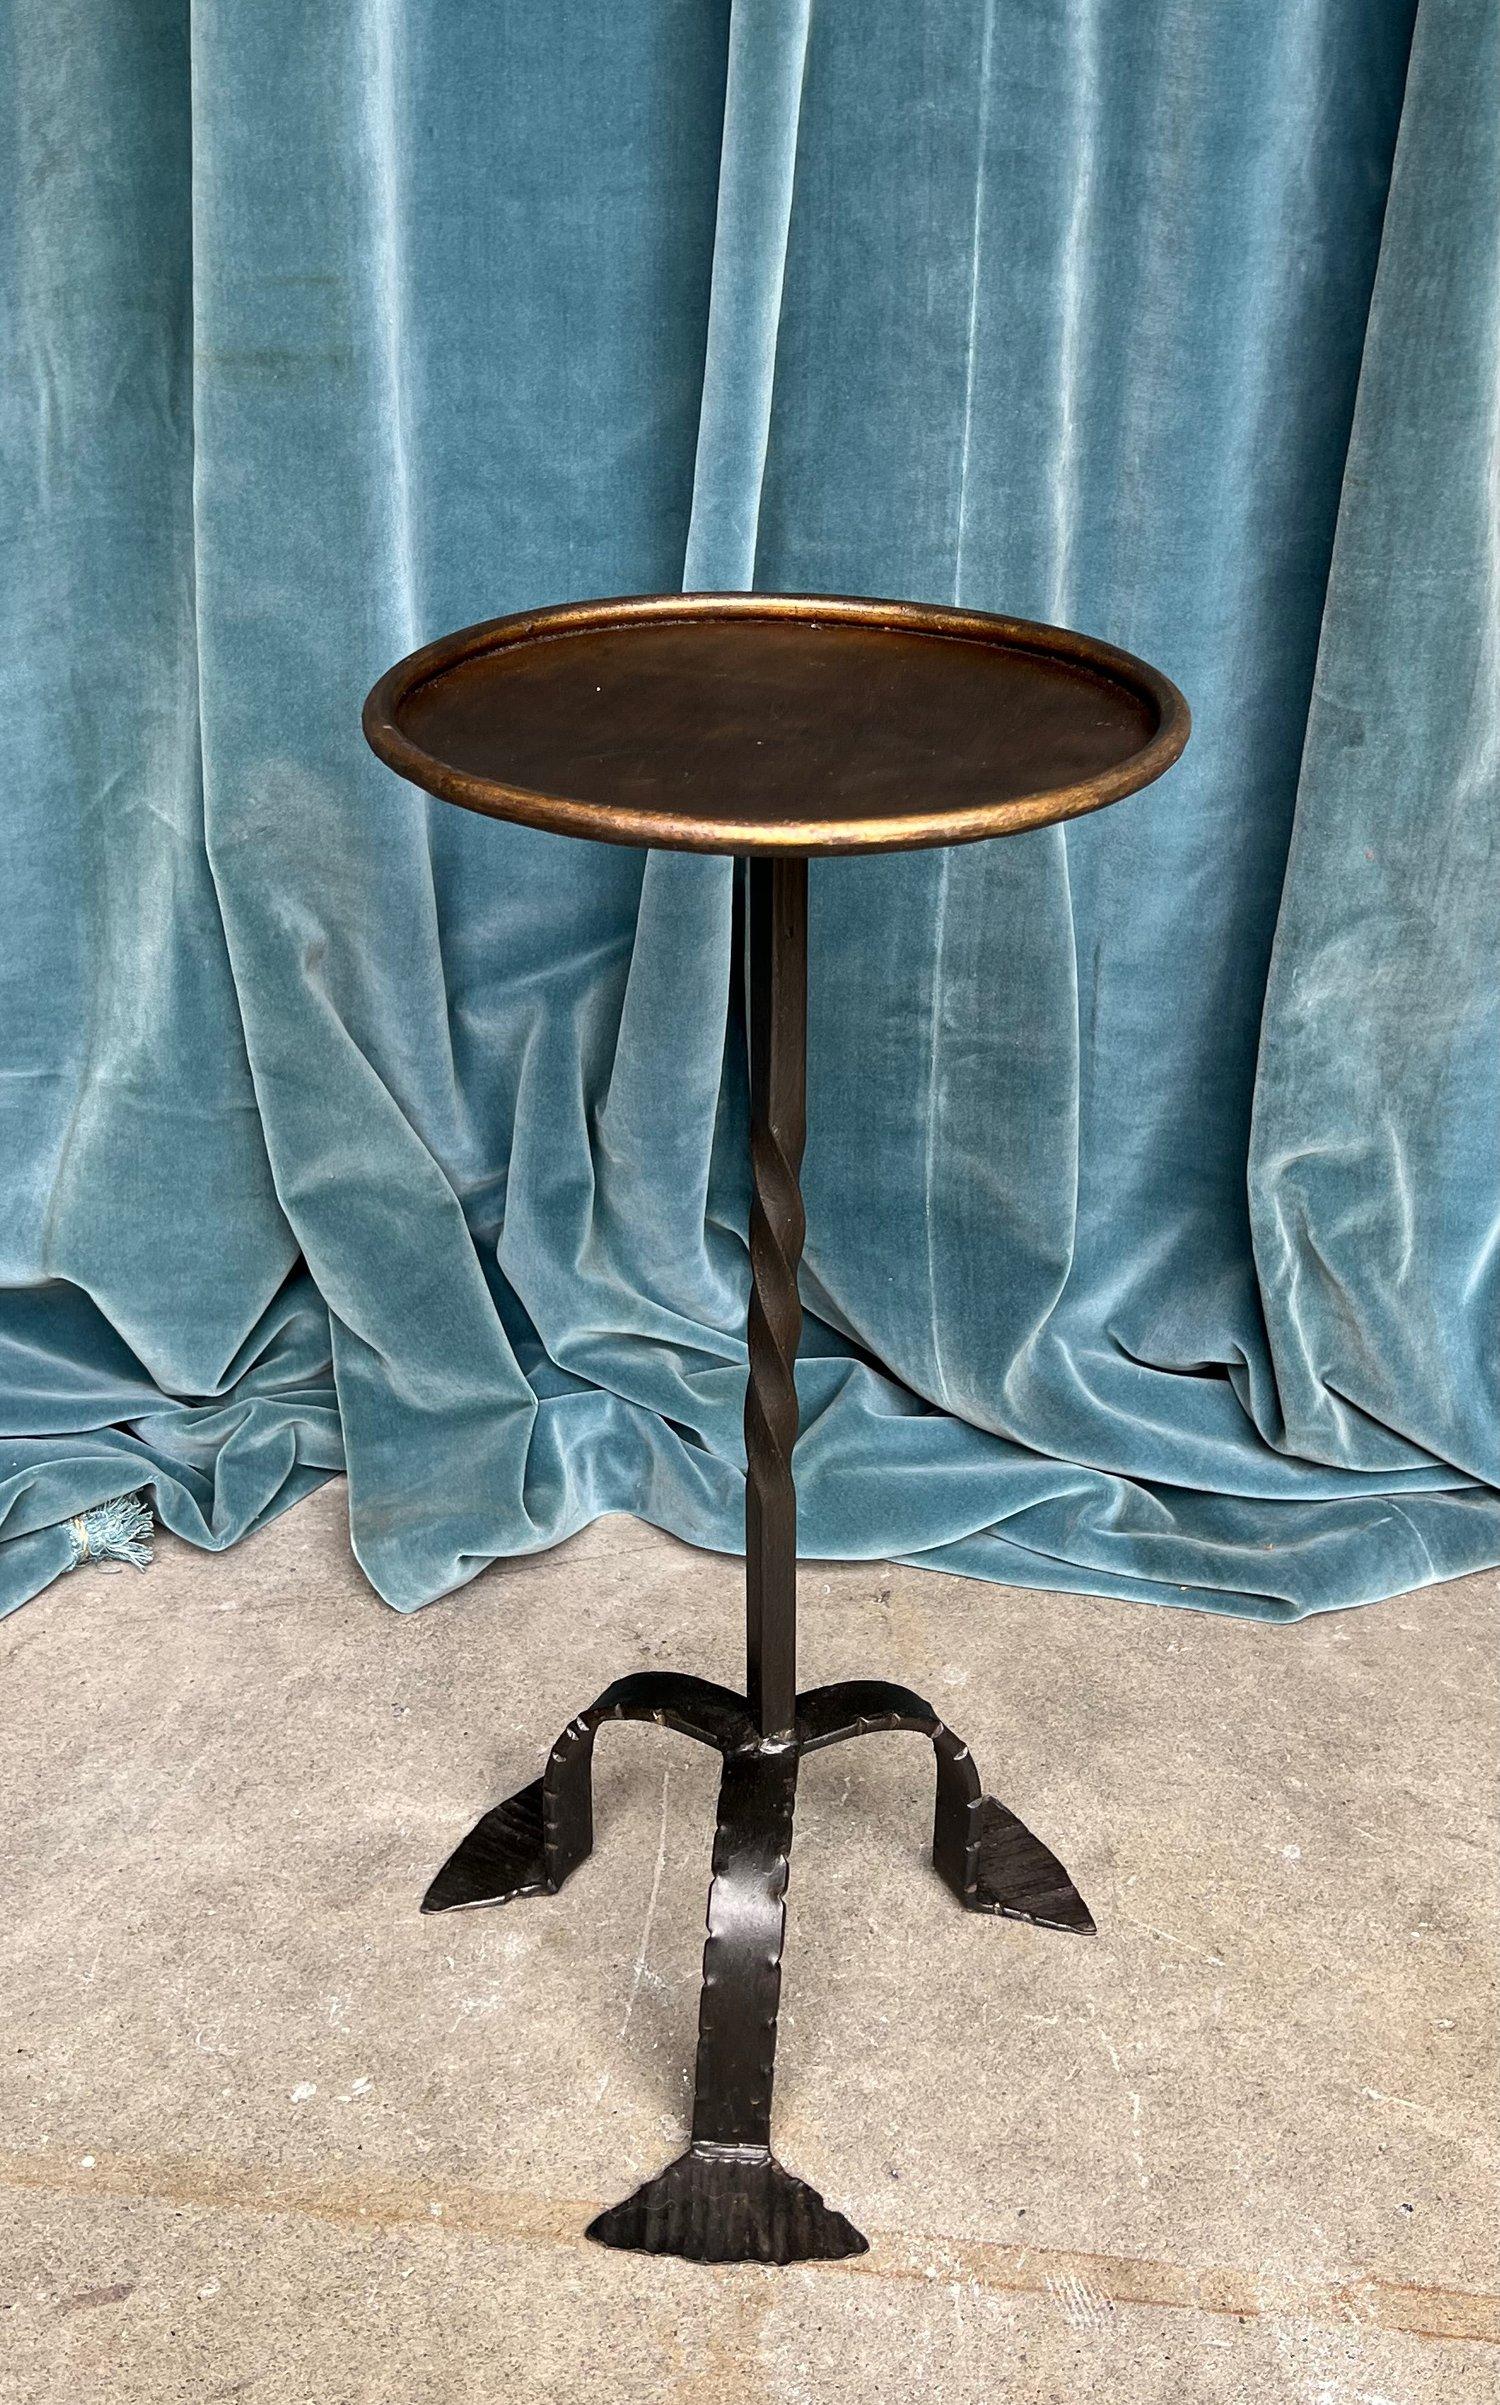 This Spanish drinks table is a unique piece distinguished by its painted black base and patinated gilt top. The table stands on a black-painted tripod base with a twisted stem, lending it a distinct vintage appeal. Its standout feature is the